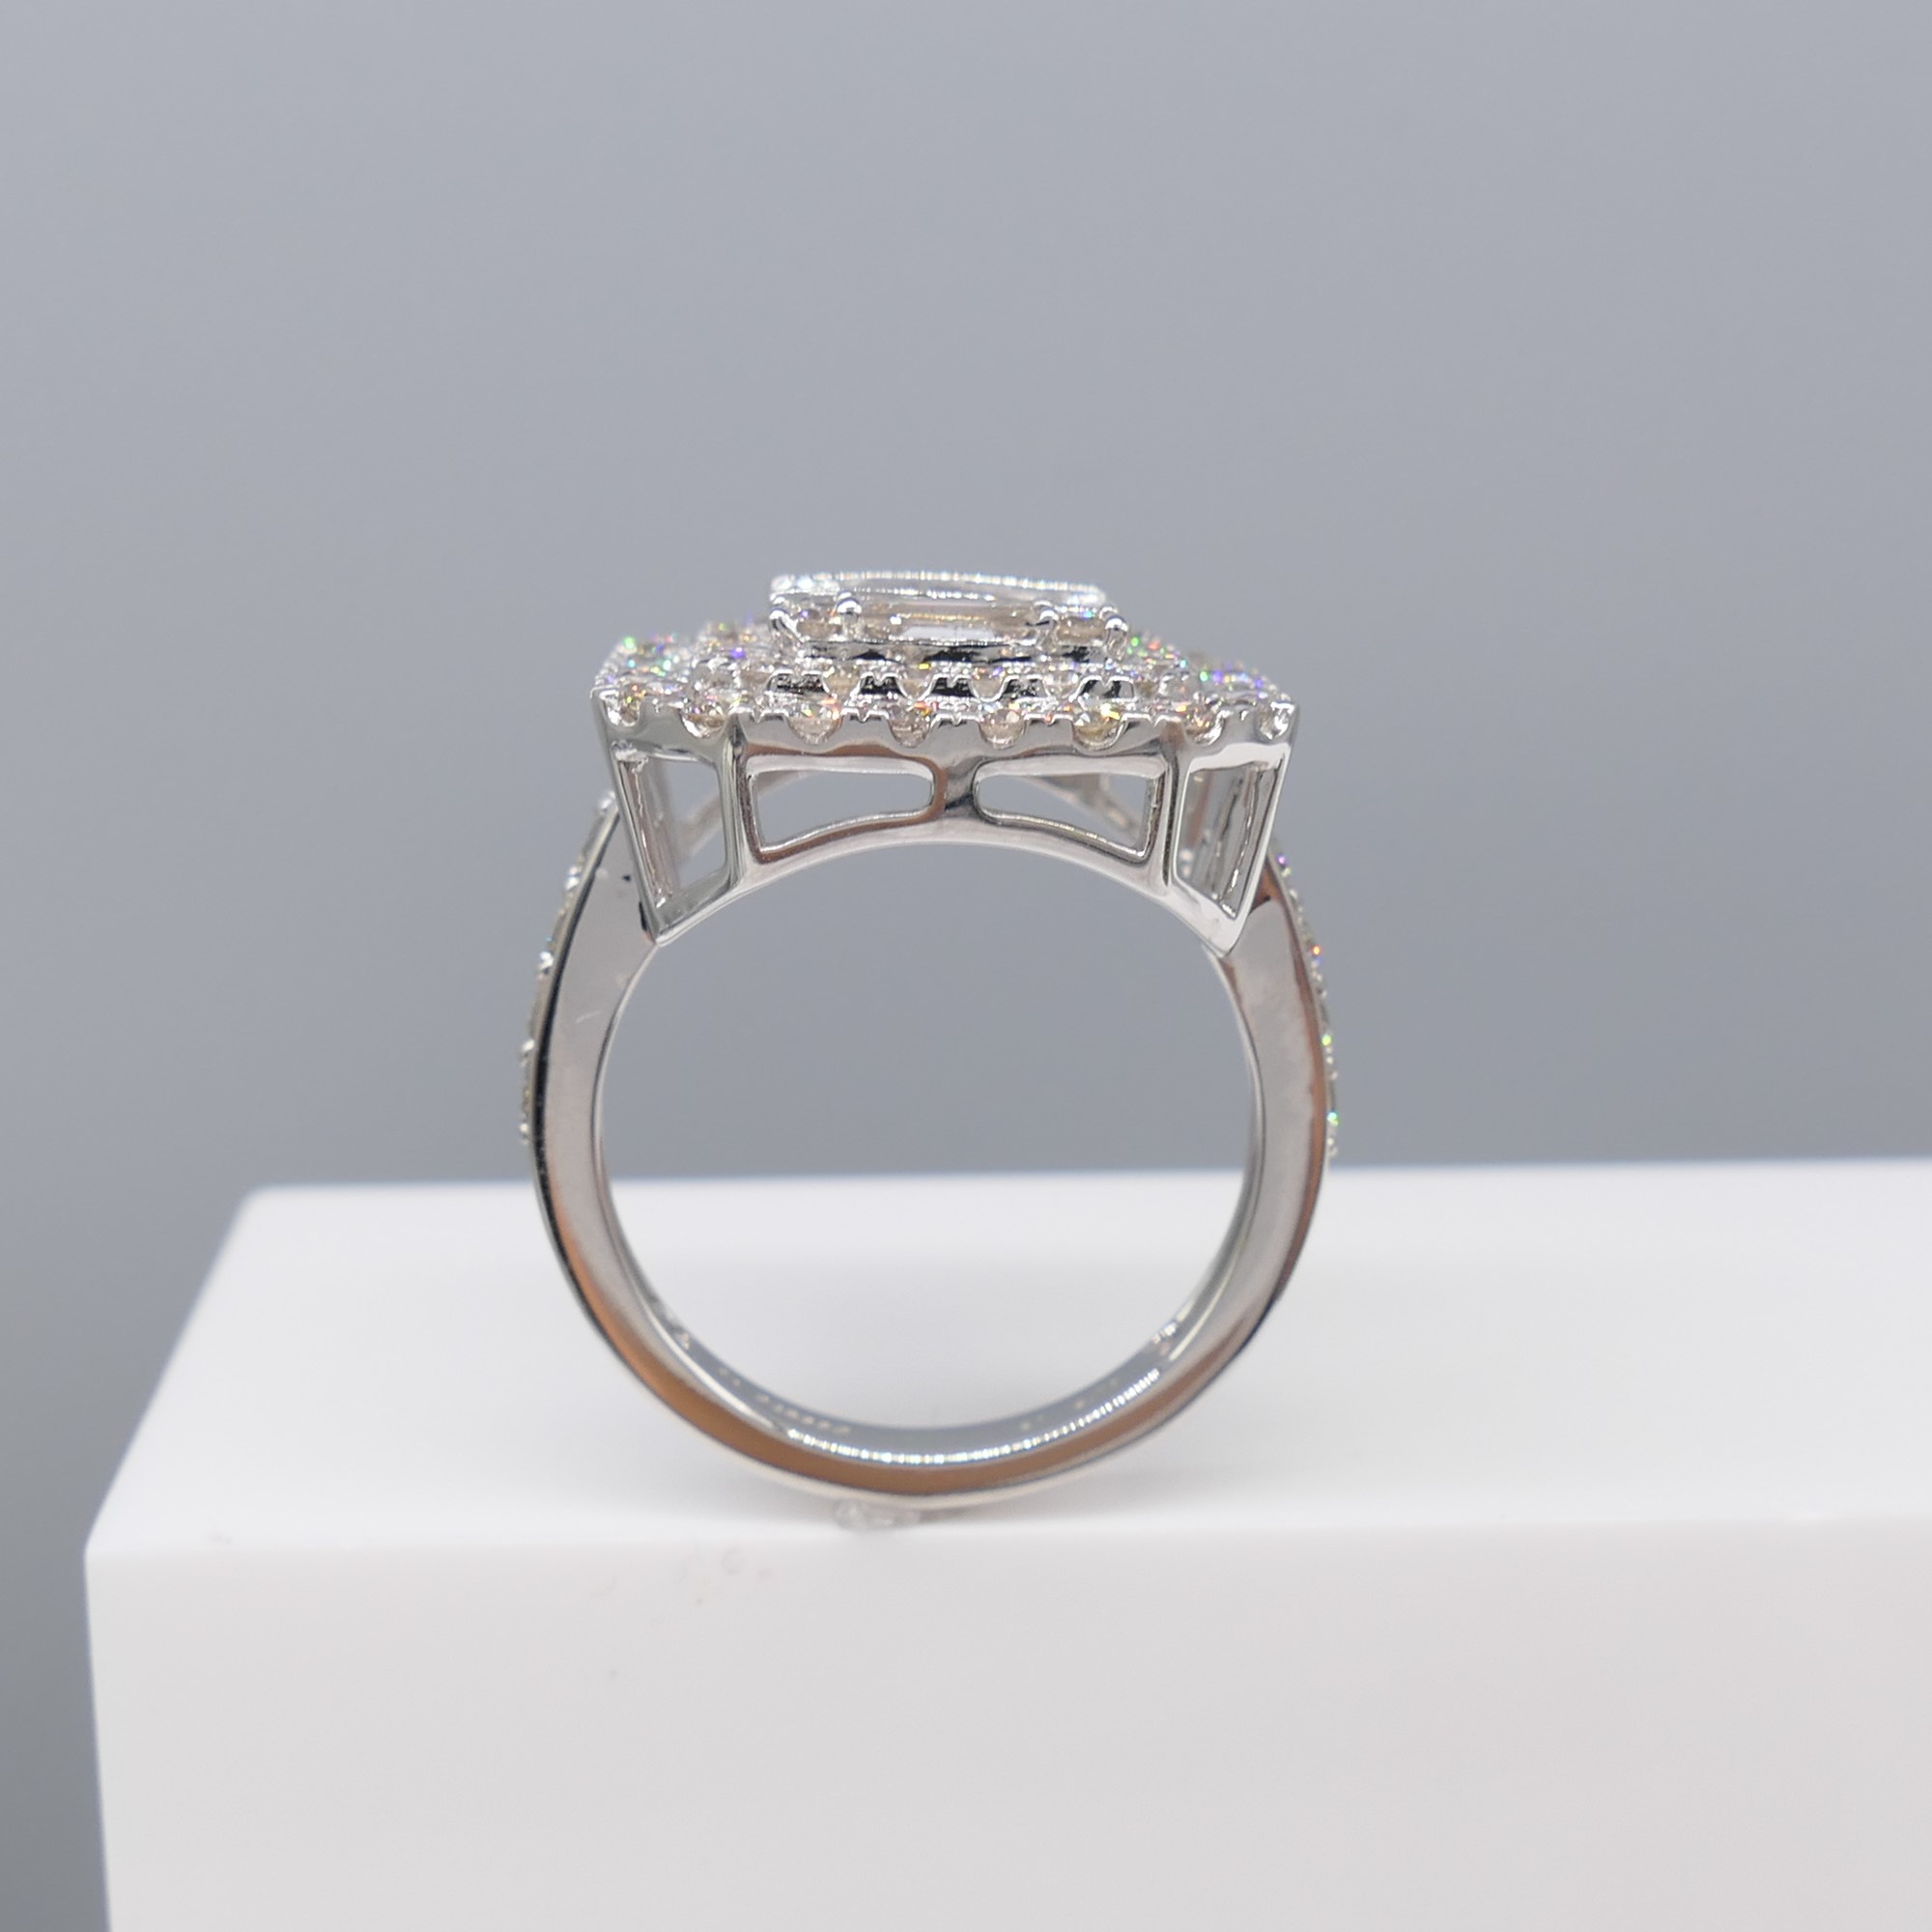 Large and Impressive White Gold 2.75 Carat Diamond Cocktail Ring - Image 8 of 8